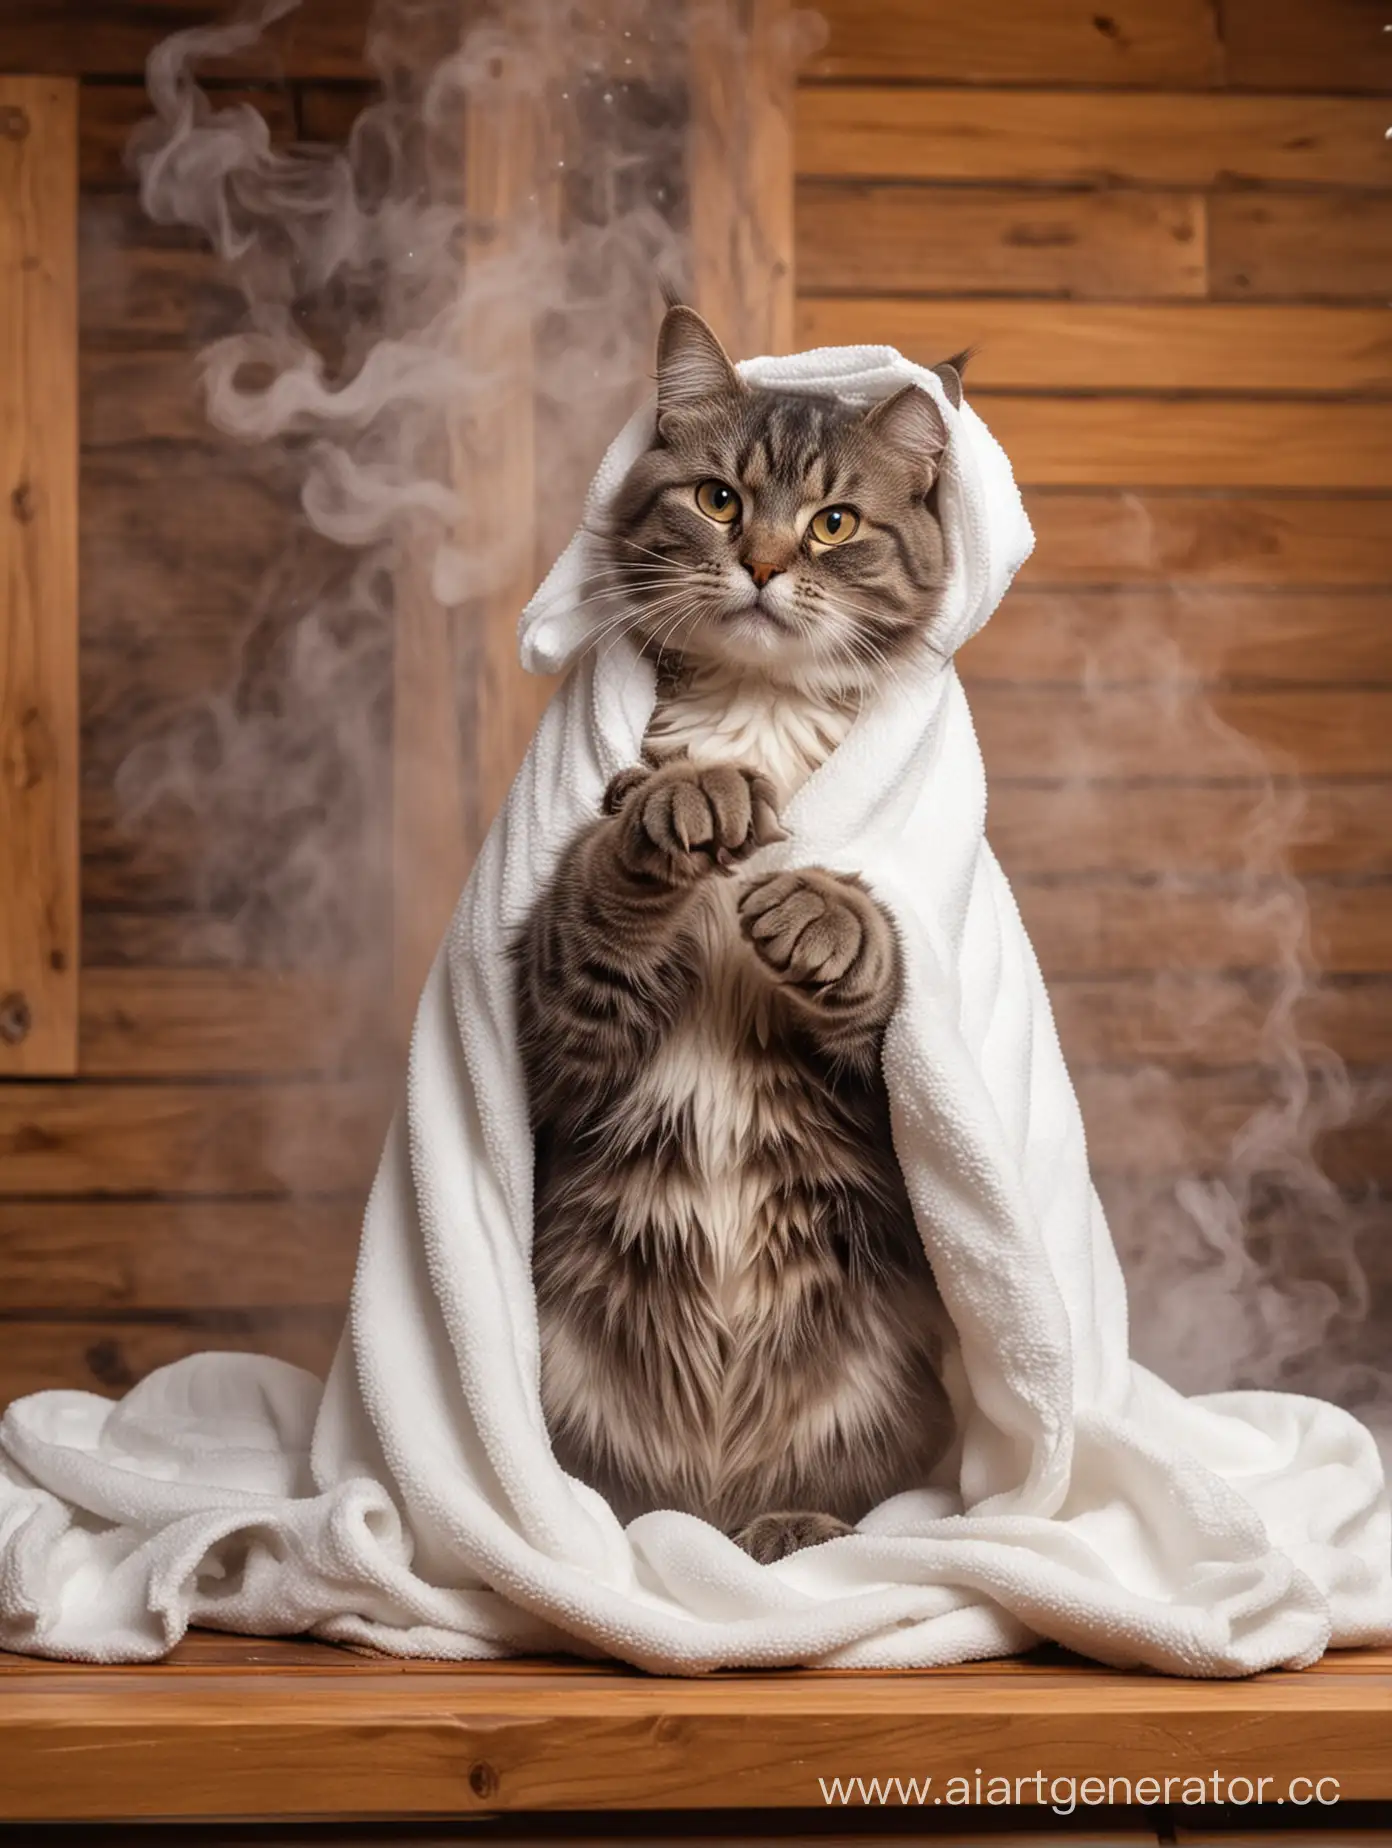 Contented-Cat-Relaxing-in-Sauna-with-Towel